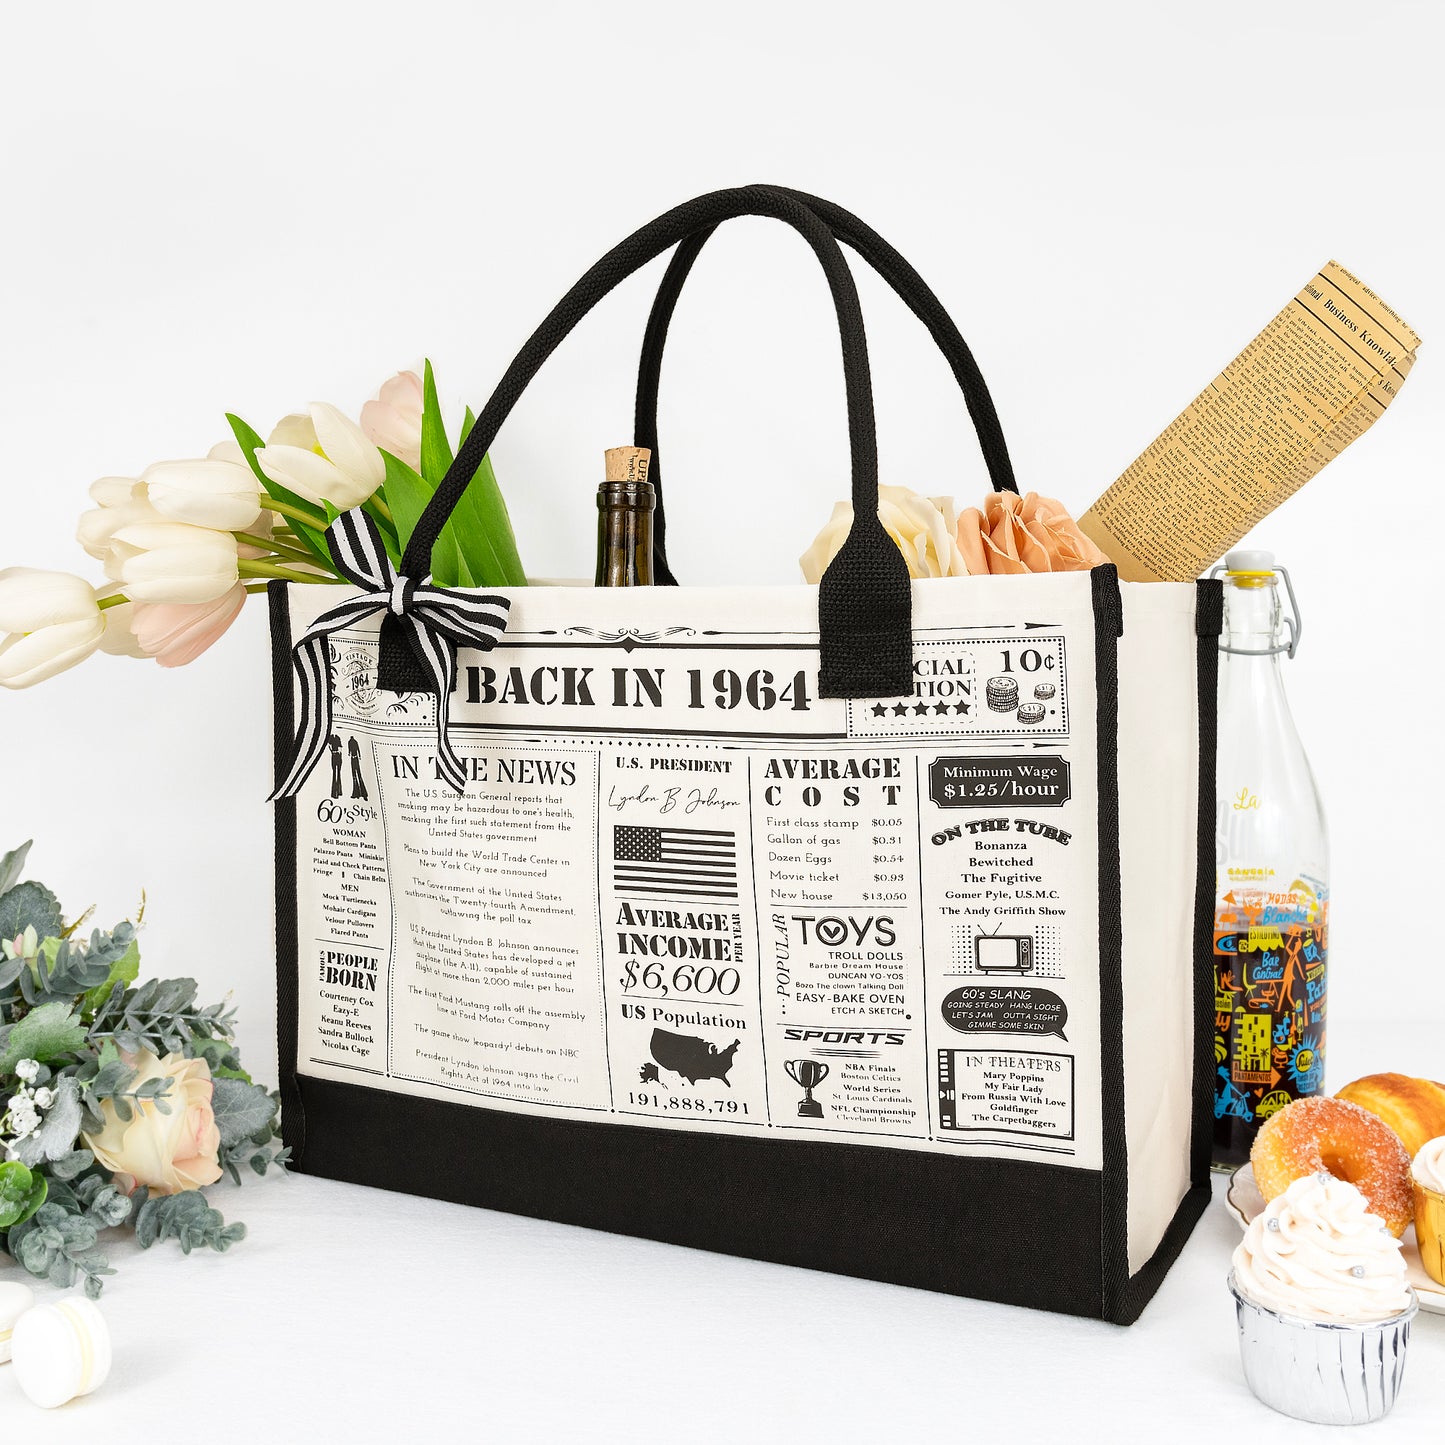 Crisky 60th Birthday Gifts for Women Canvas Tote Bag Vintage 1964 Beach Bag for Wife/Sister/Mom/Aunt/Friends 60th Birthday Gifts,17" x 12" x 7"